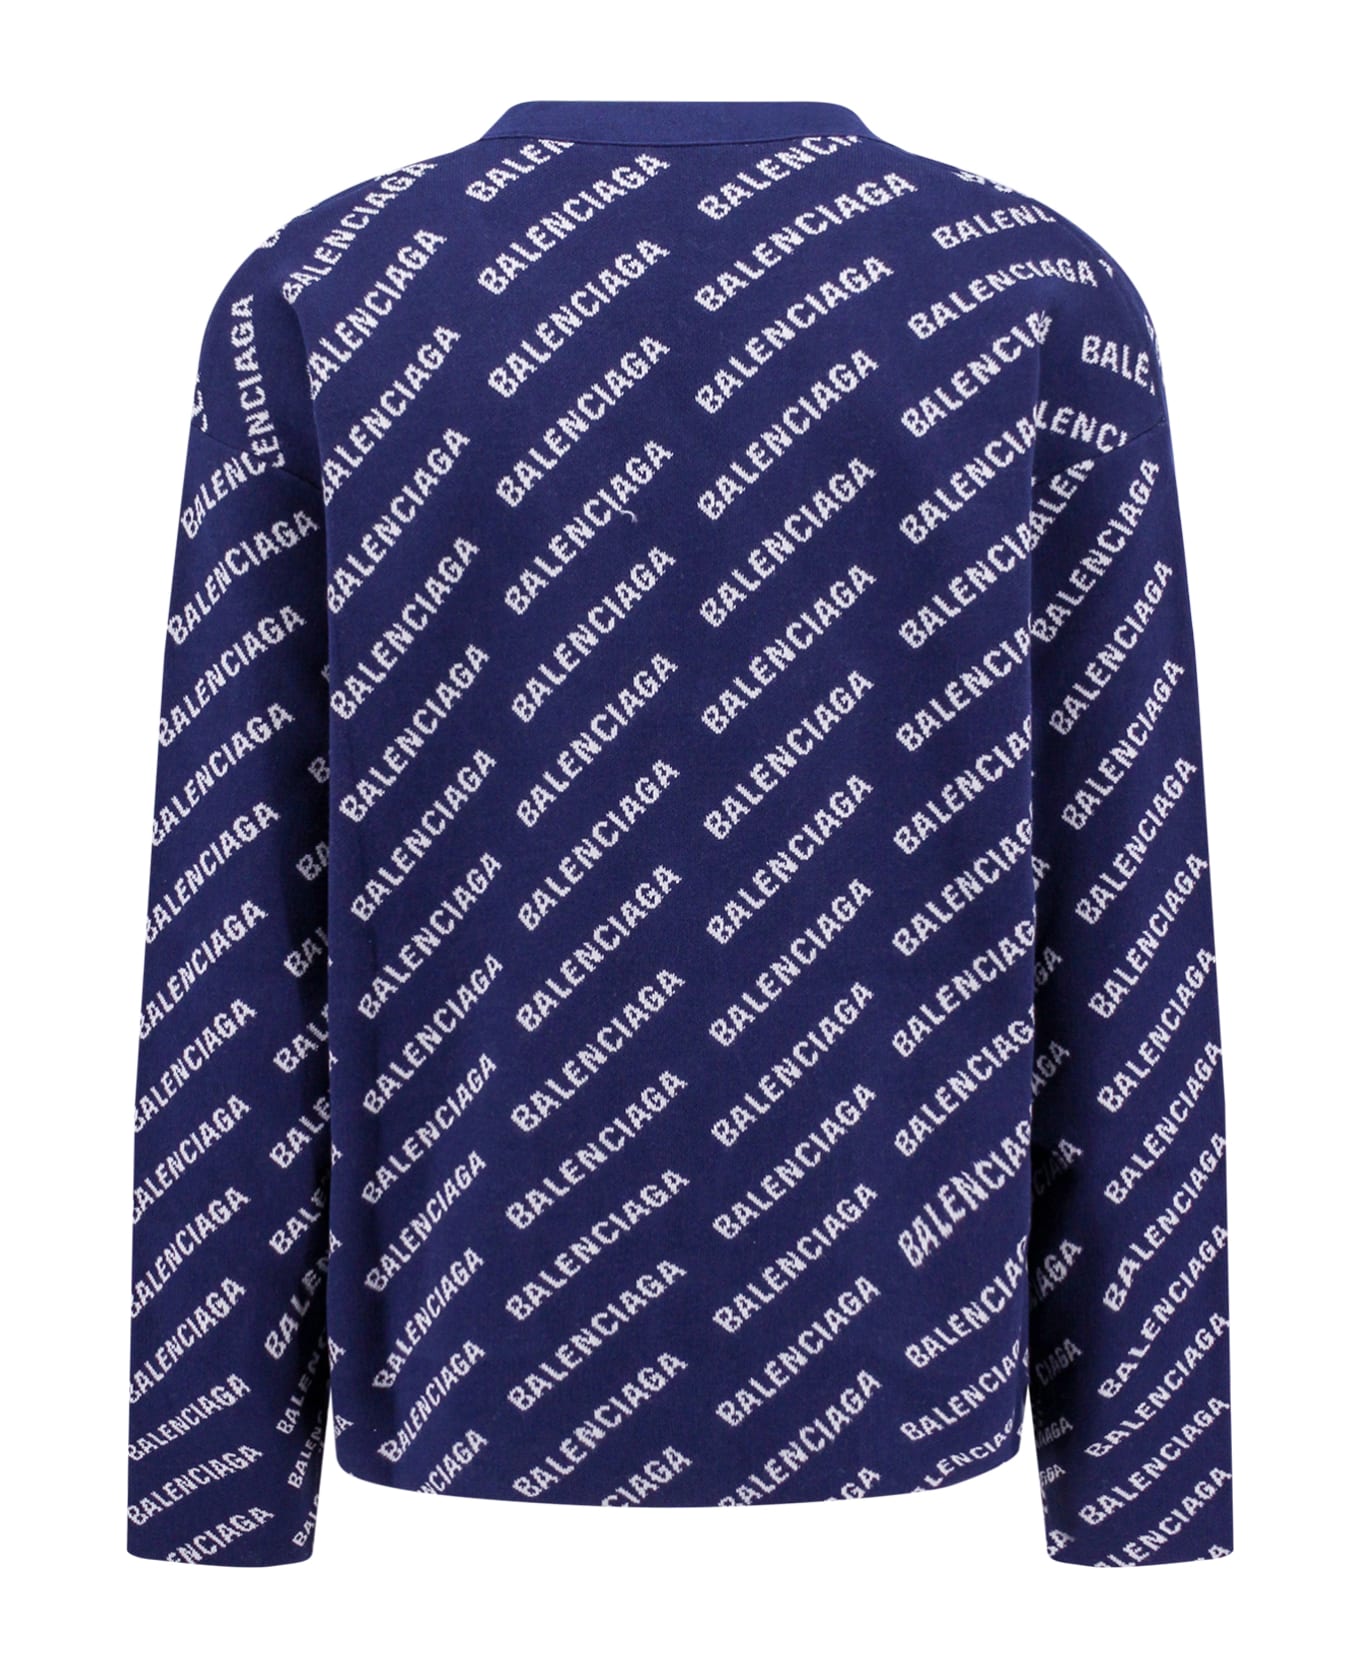 Balenciaga Embroidered Stretch Cotton Blend Oversize Cardigan - Blue カーディガン